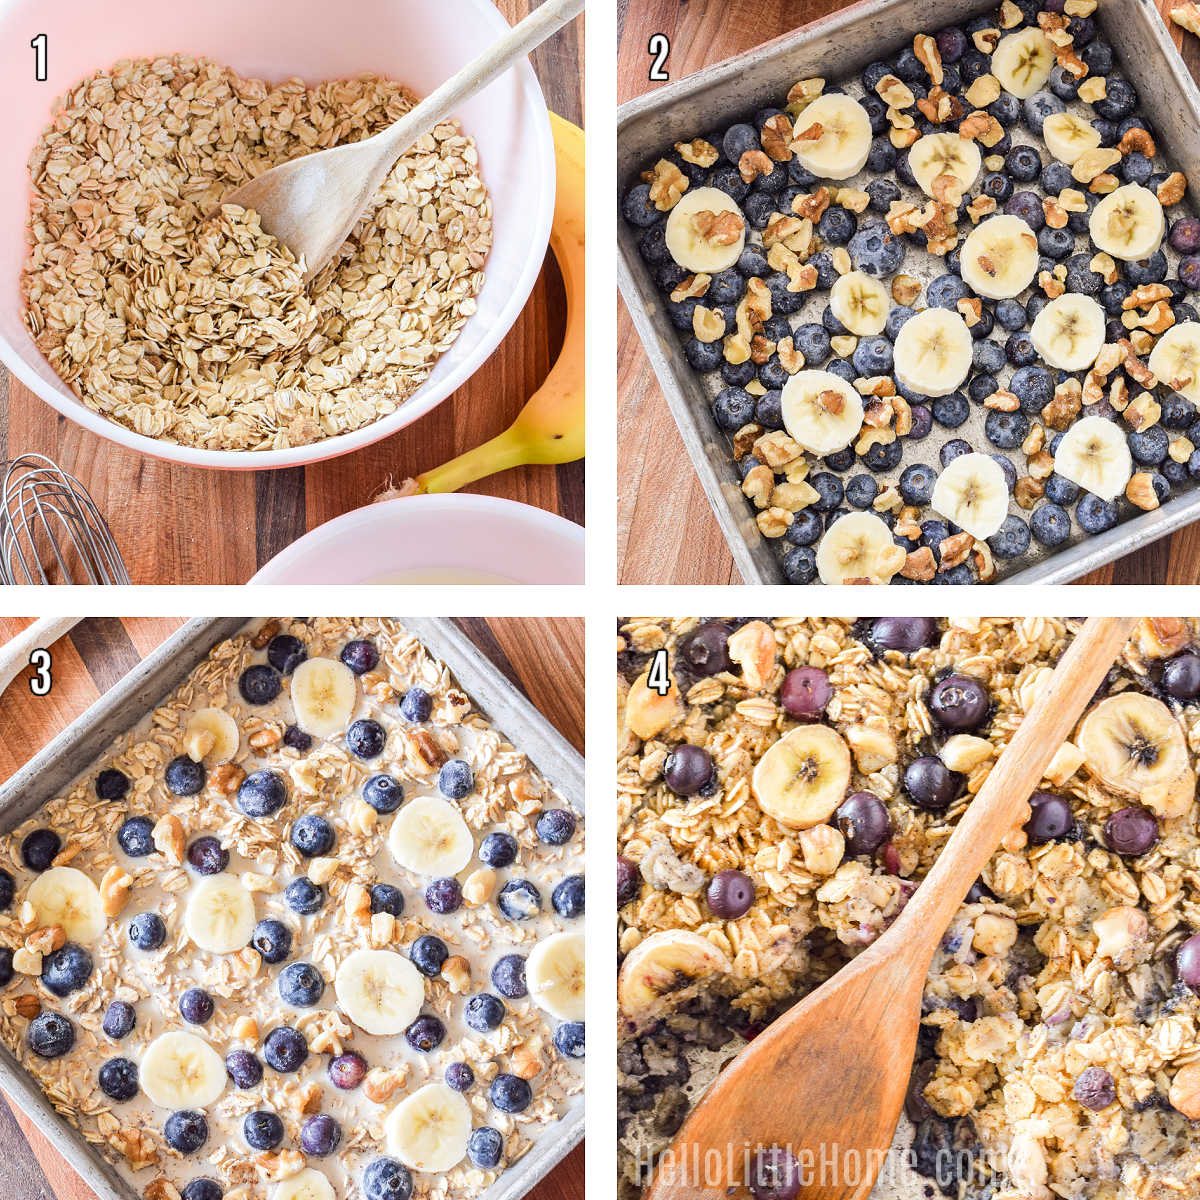 A photo collage showing how to make blueberry baked oatmeal step by step.